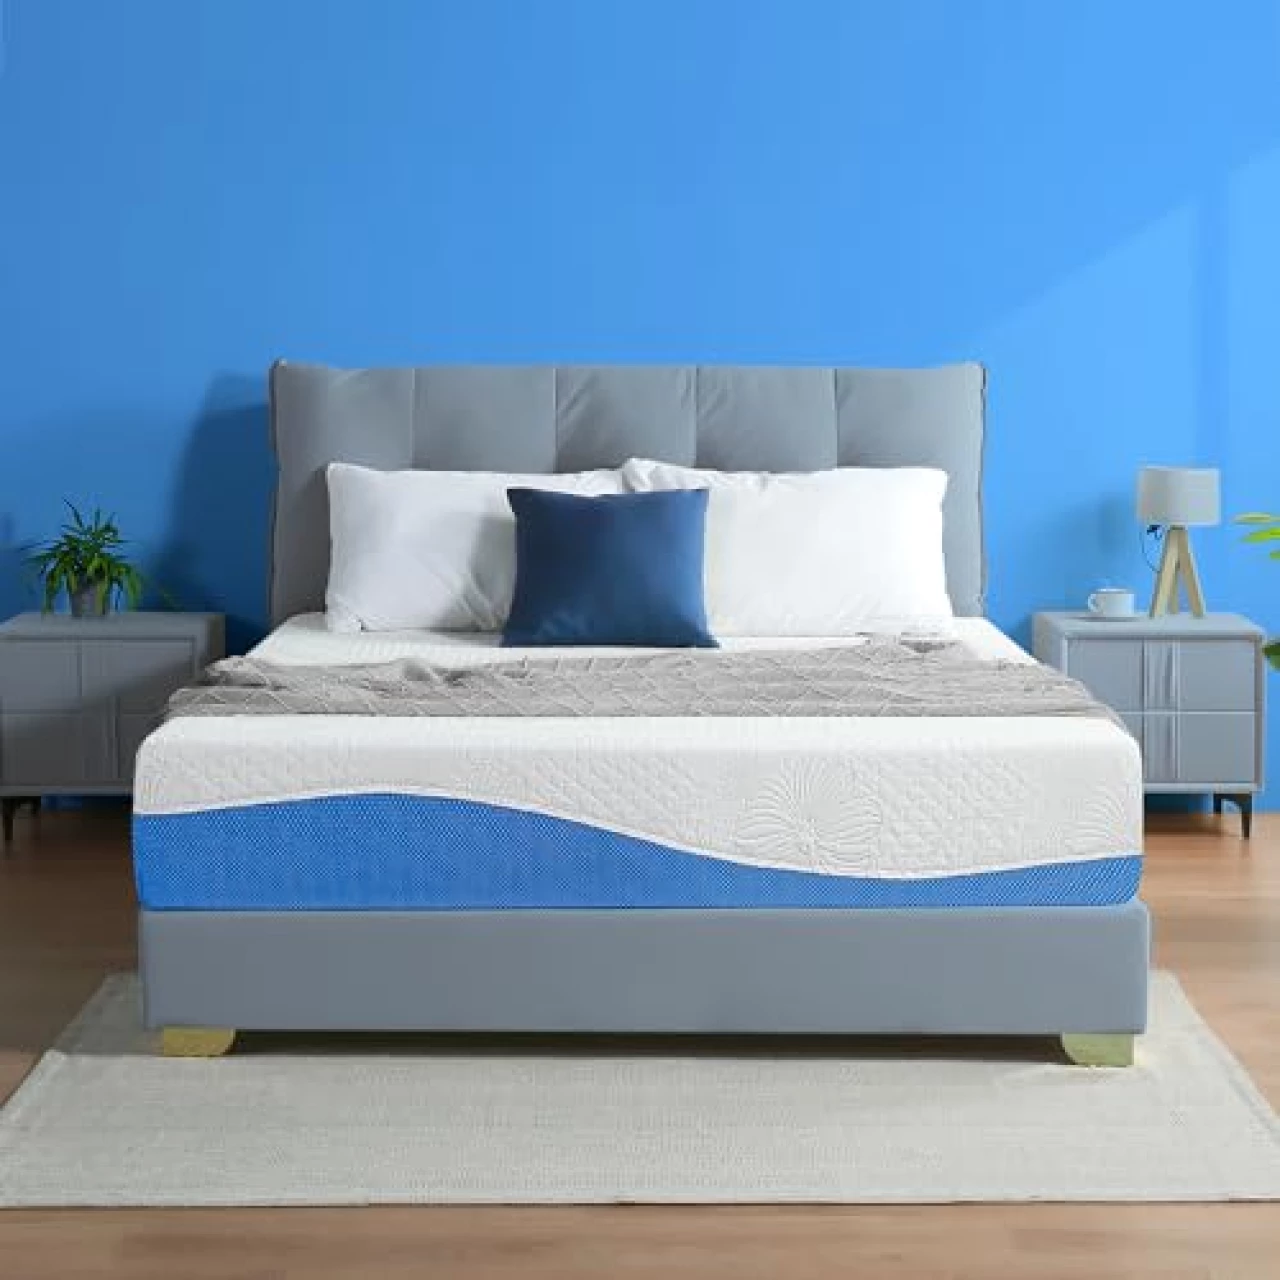 Olee Sleep King Mattress, 10 Inch Gel Memory Foam Mattress, Gel Infused for Comfort and Pressure Relief, CertiPUR-US Certified, Bed-in-a-Box, Medium Firm, Blue, King Size